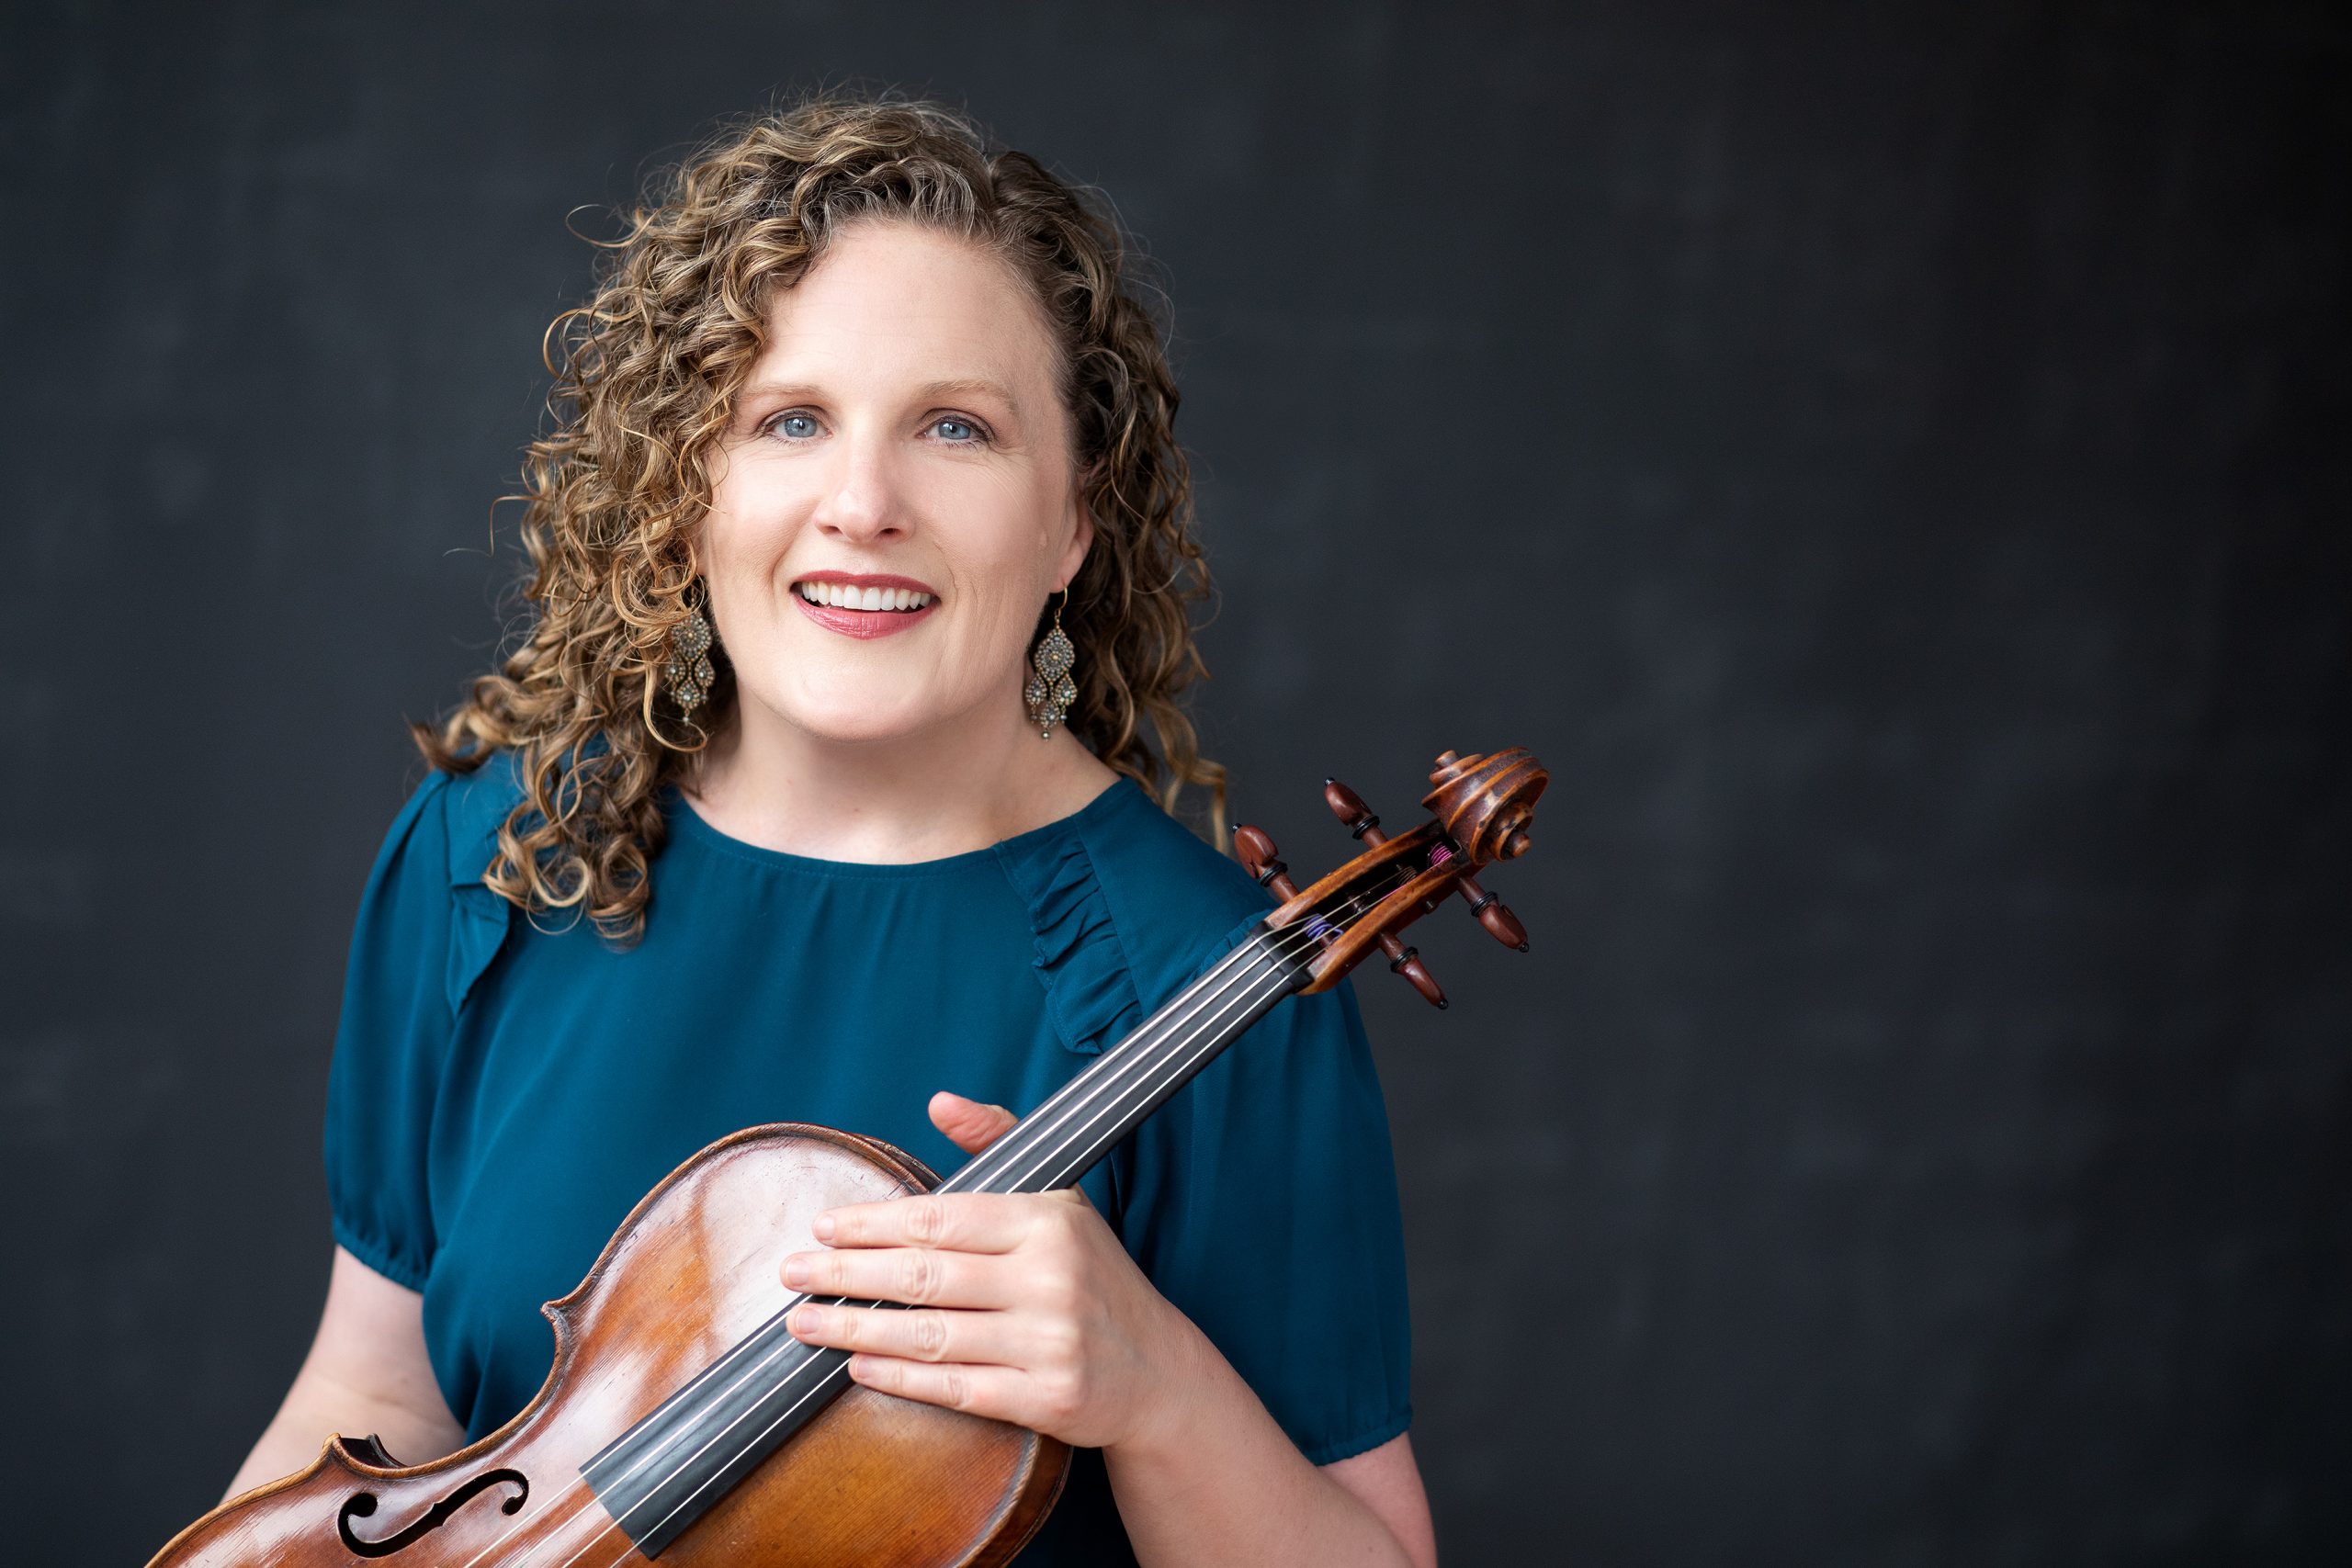 Prof. Kirsten Docter posed with viola